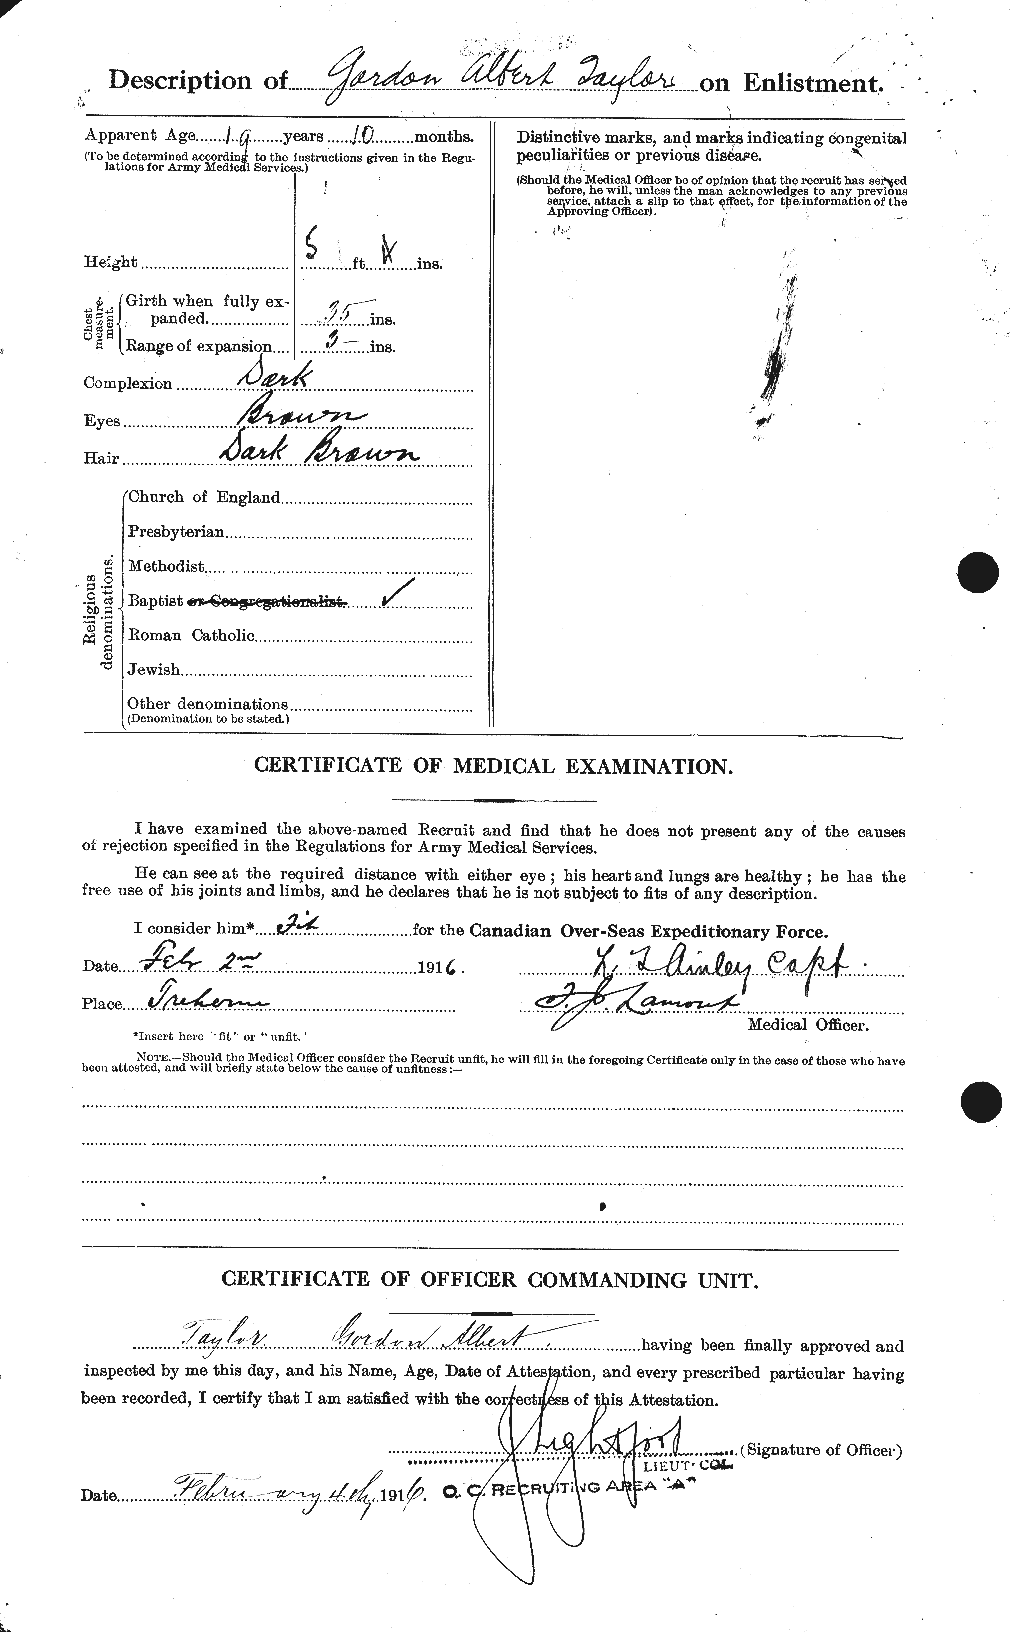 Personnel Records of the First World War - CEF 626385b